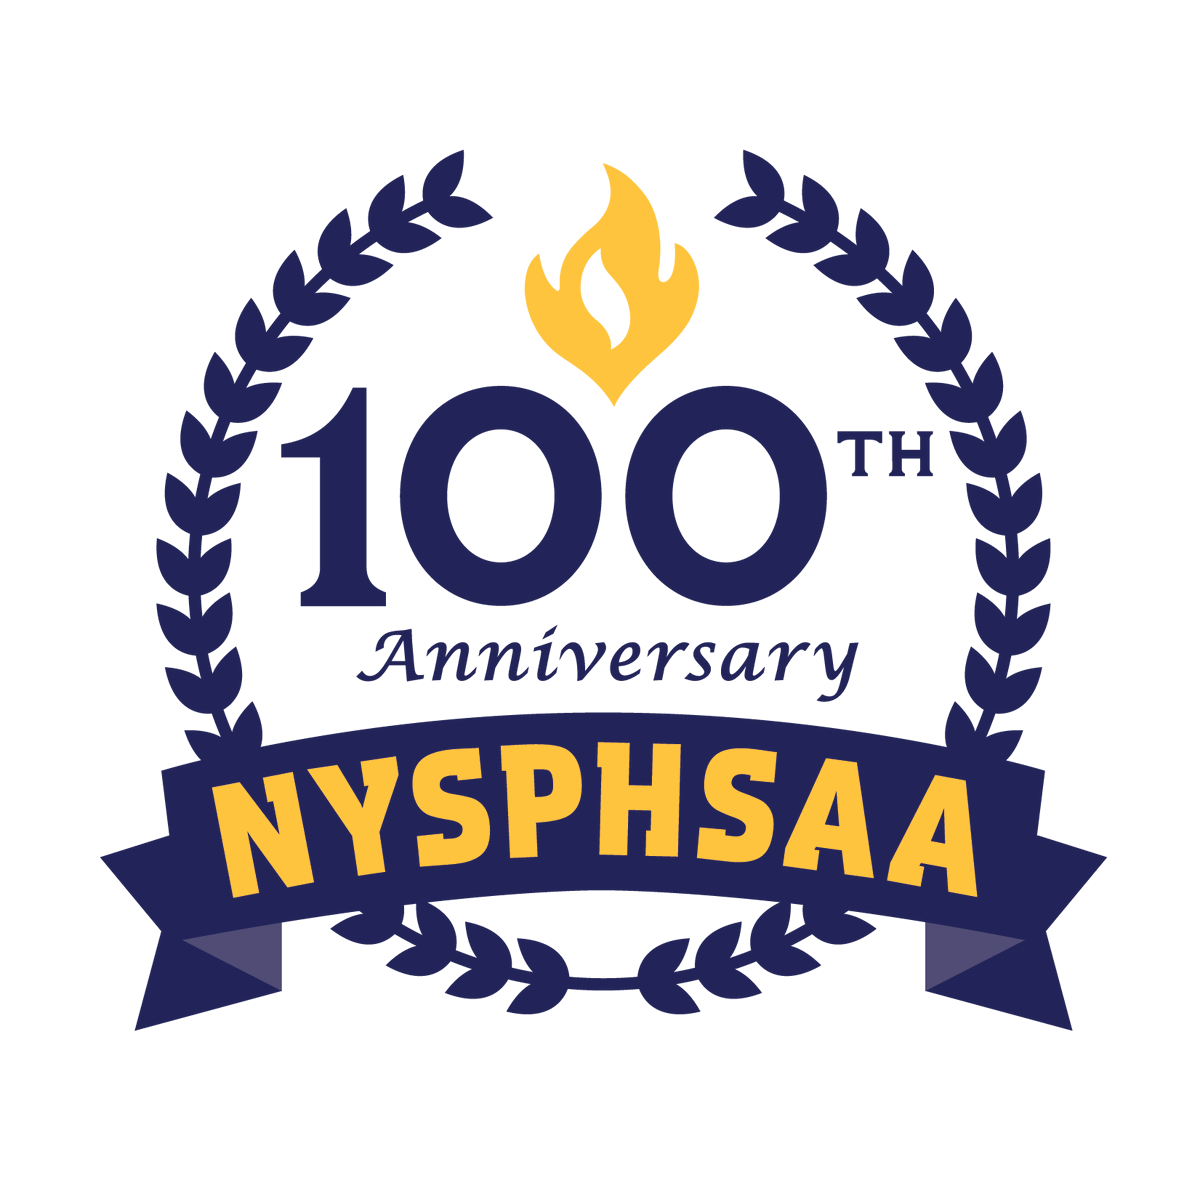 #NYSPHSAA100: The first NYSPHA Association of Basketball Leagues held its first state tournament in March 1922 at Archibald Gymnasium at Syracuse University.  Syracuse Central H.S. defeated Rochester H.S. 25-19 in OT. https://t.co/TC8XKsSCSP